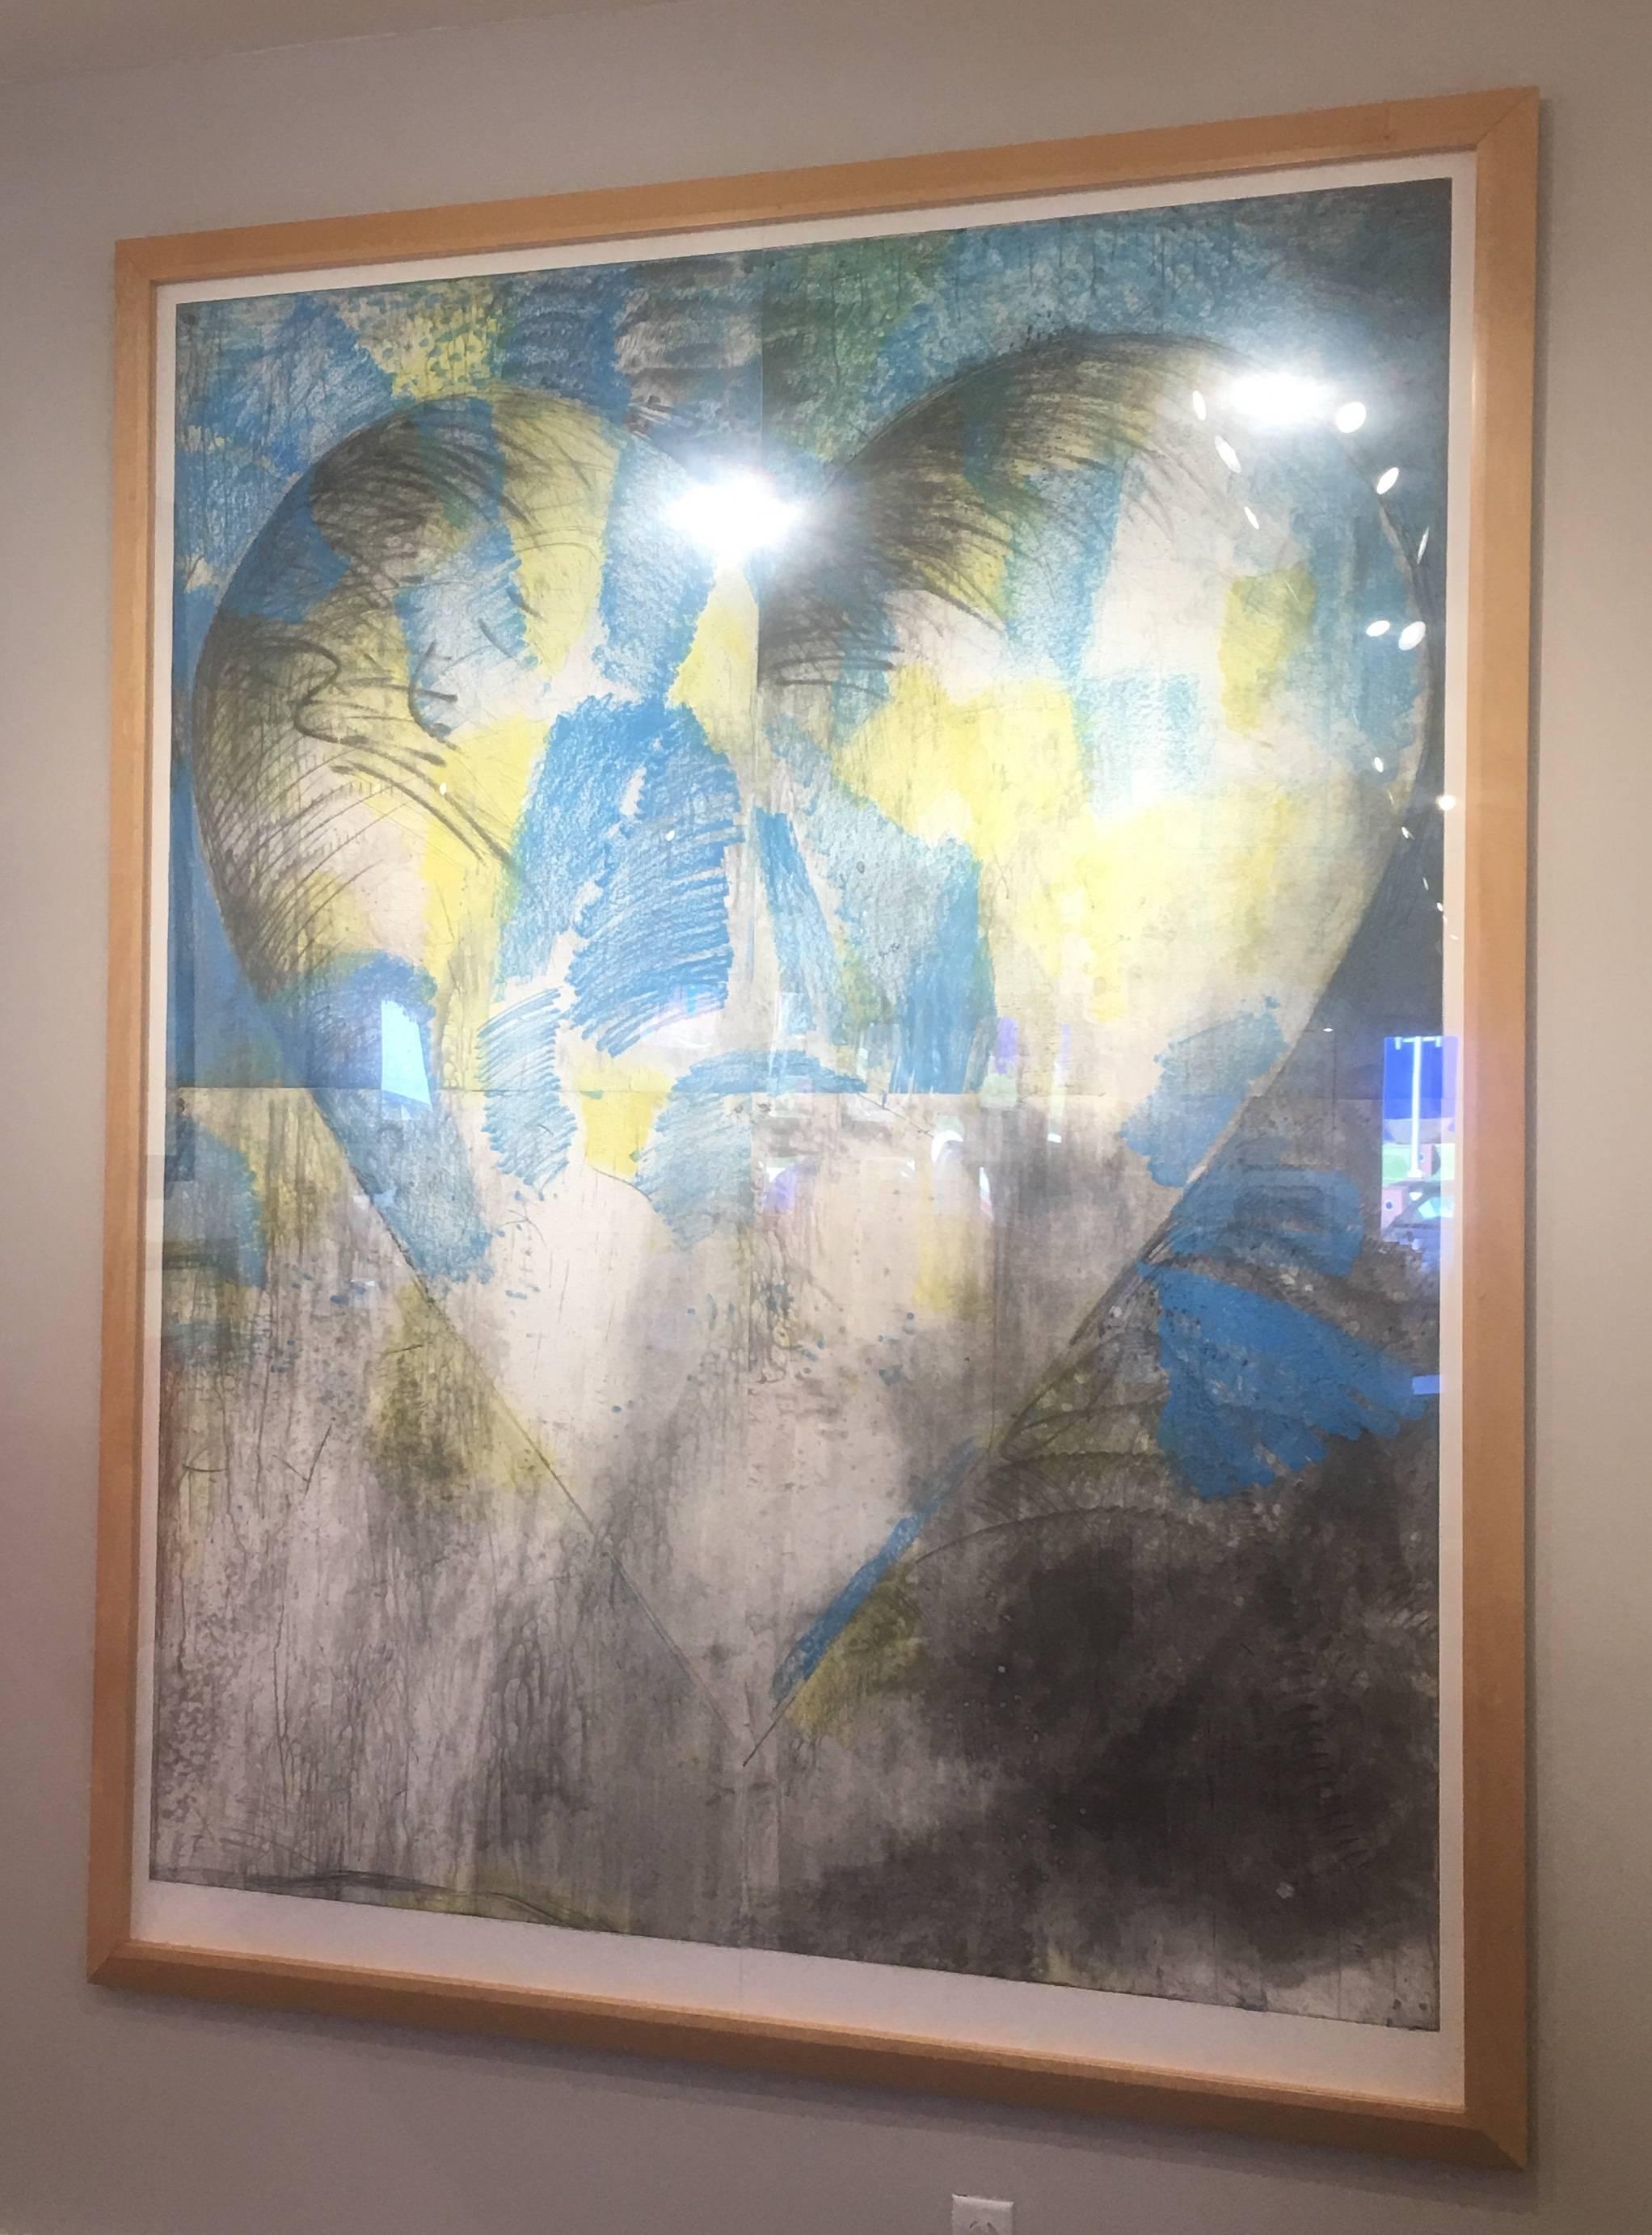 Heart and the Wall - Print by Jim Dine